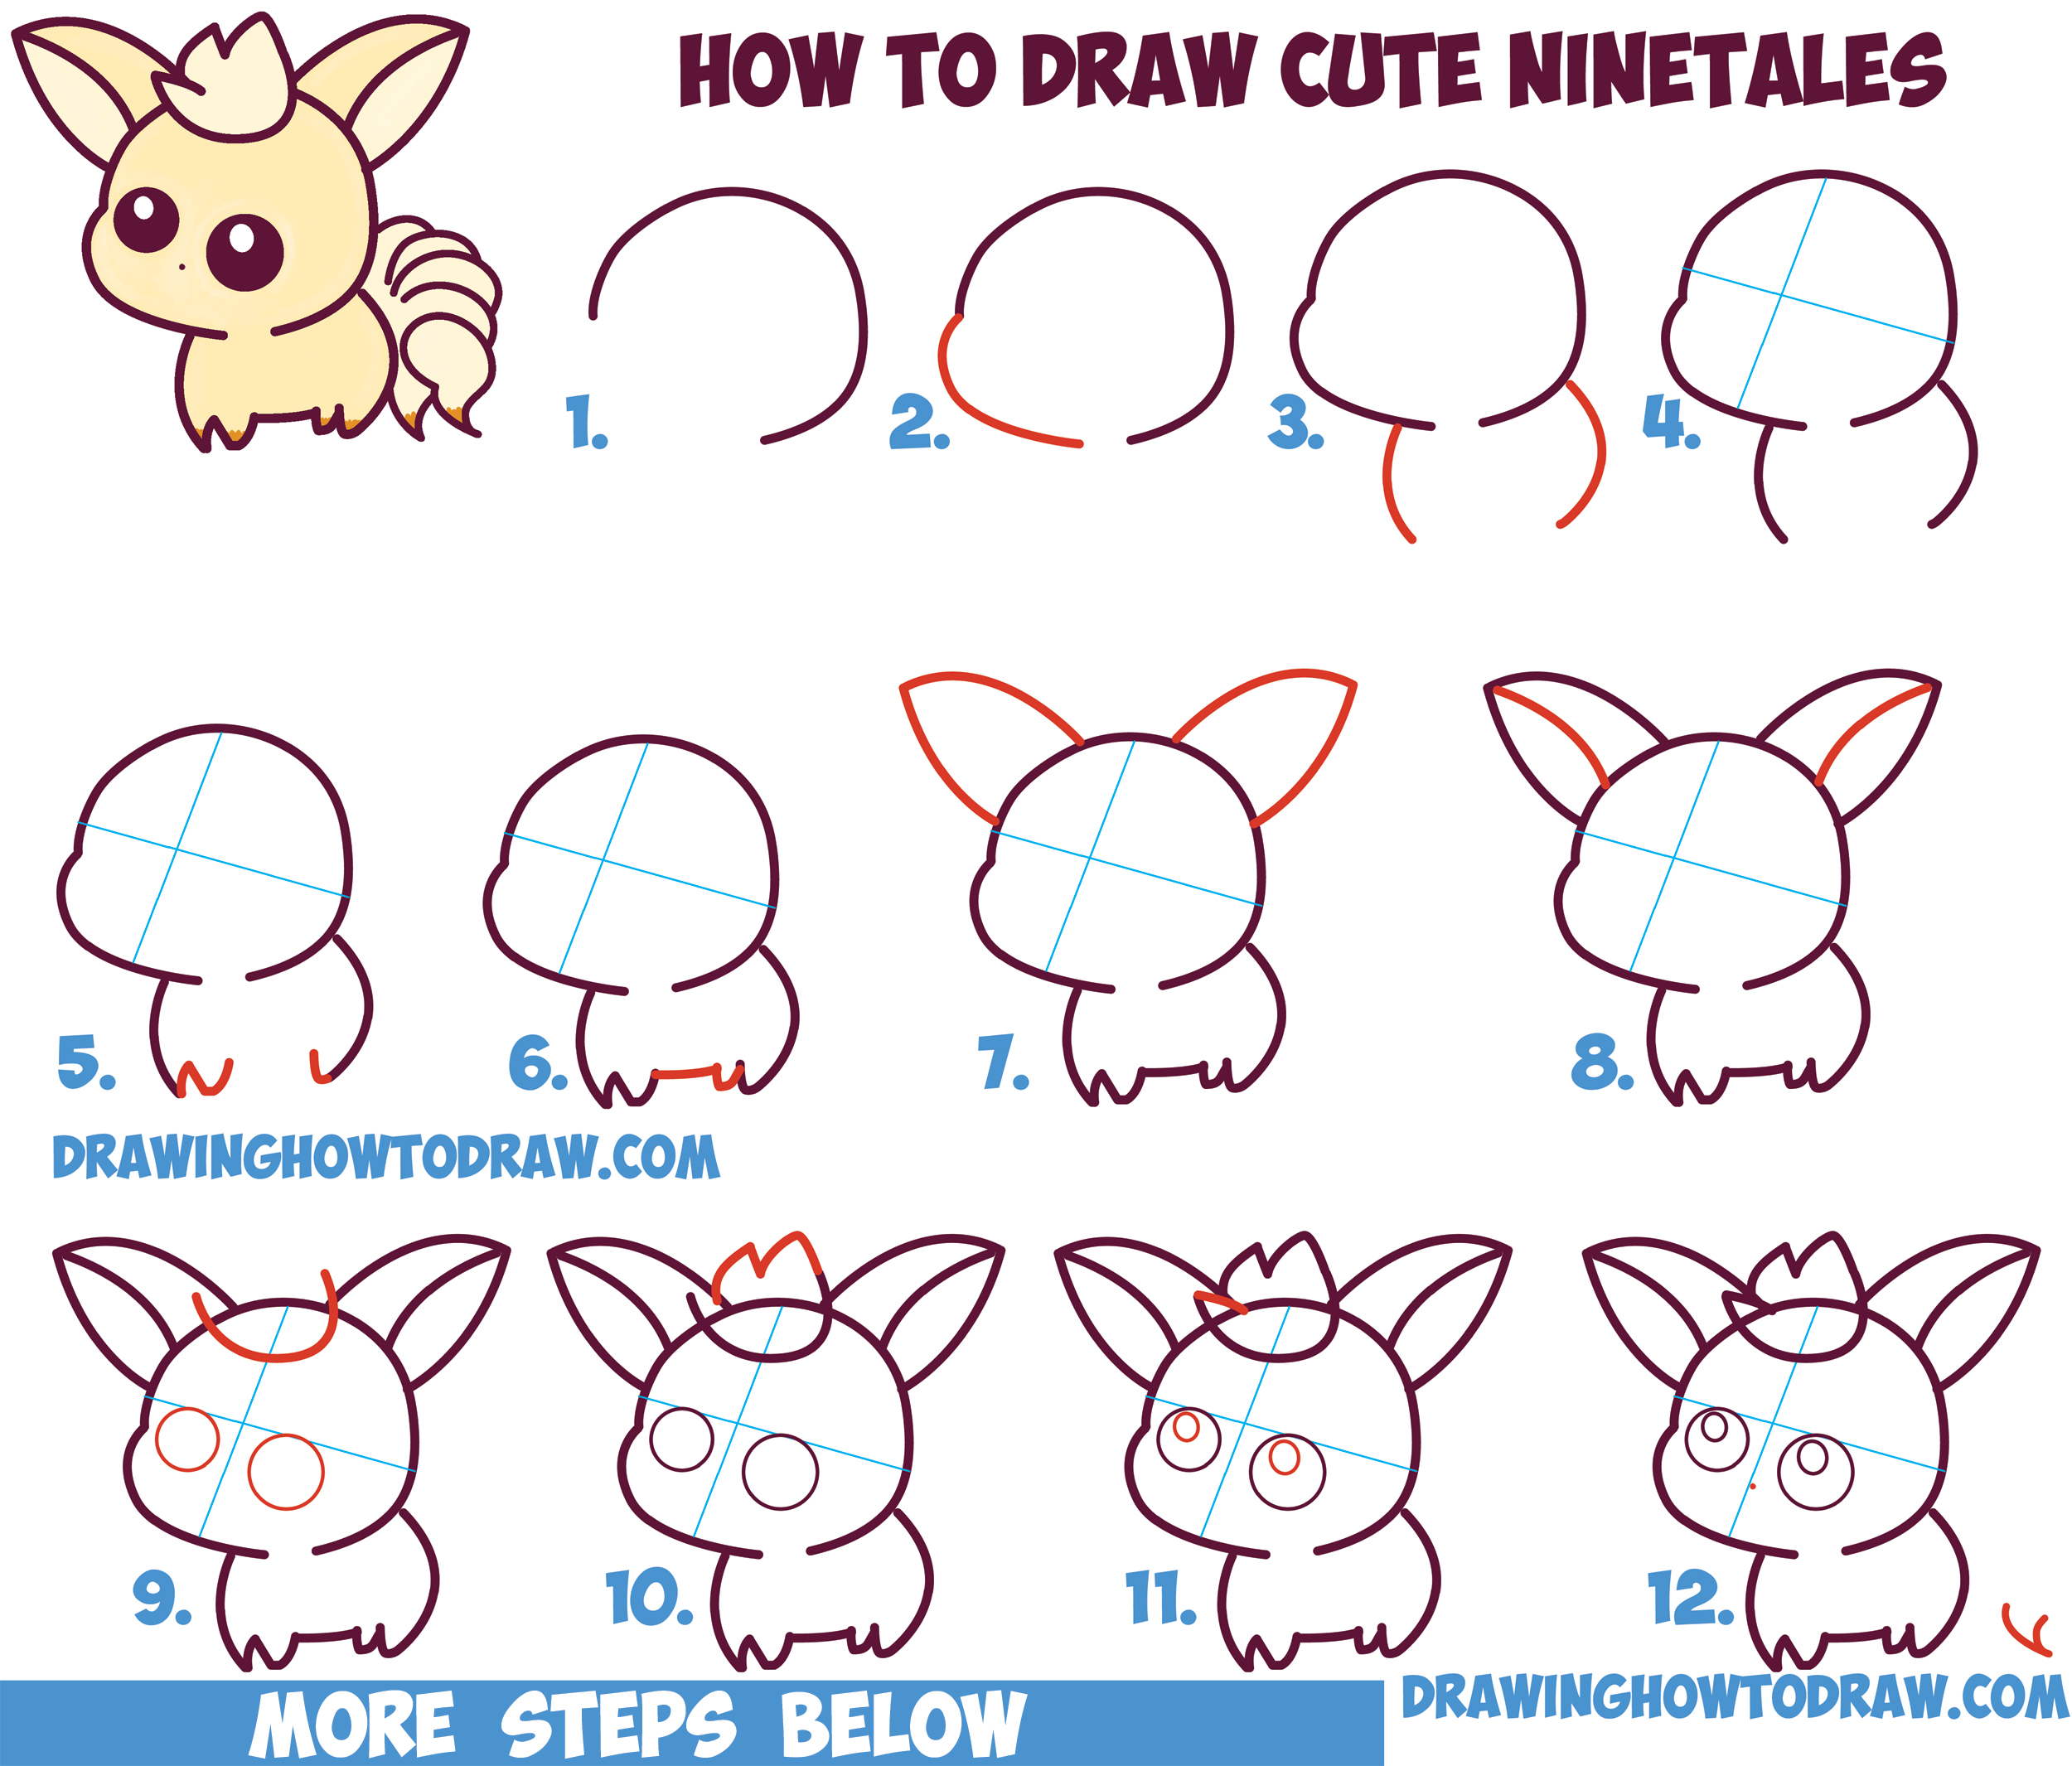 How to Draw Cute / Kawaii / Chibi NineTales from Pokemon in Easy Step by Step Drawing Tutorial for Beginners